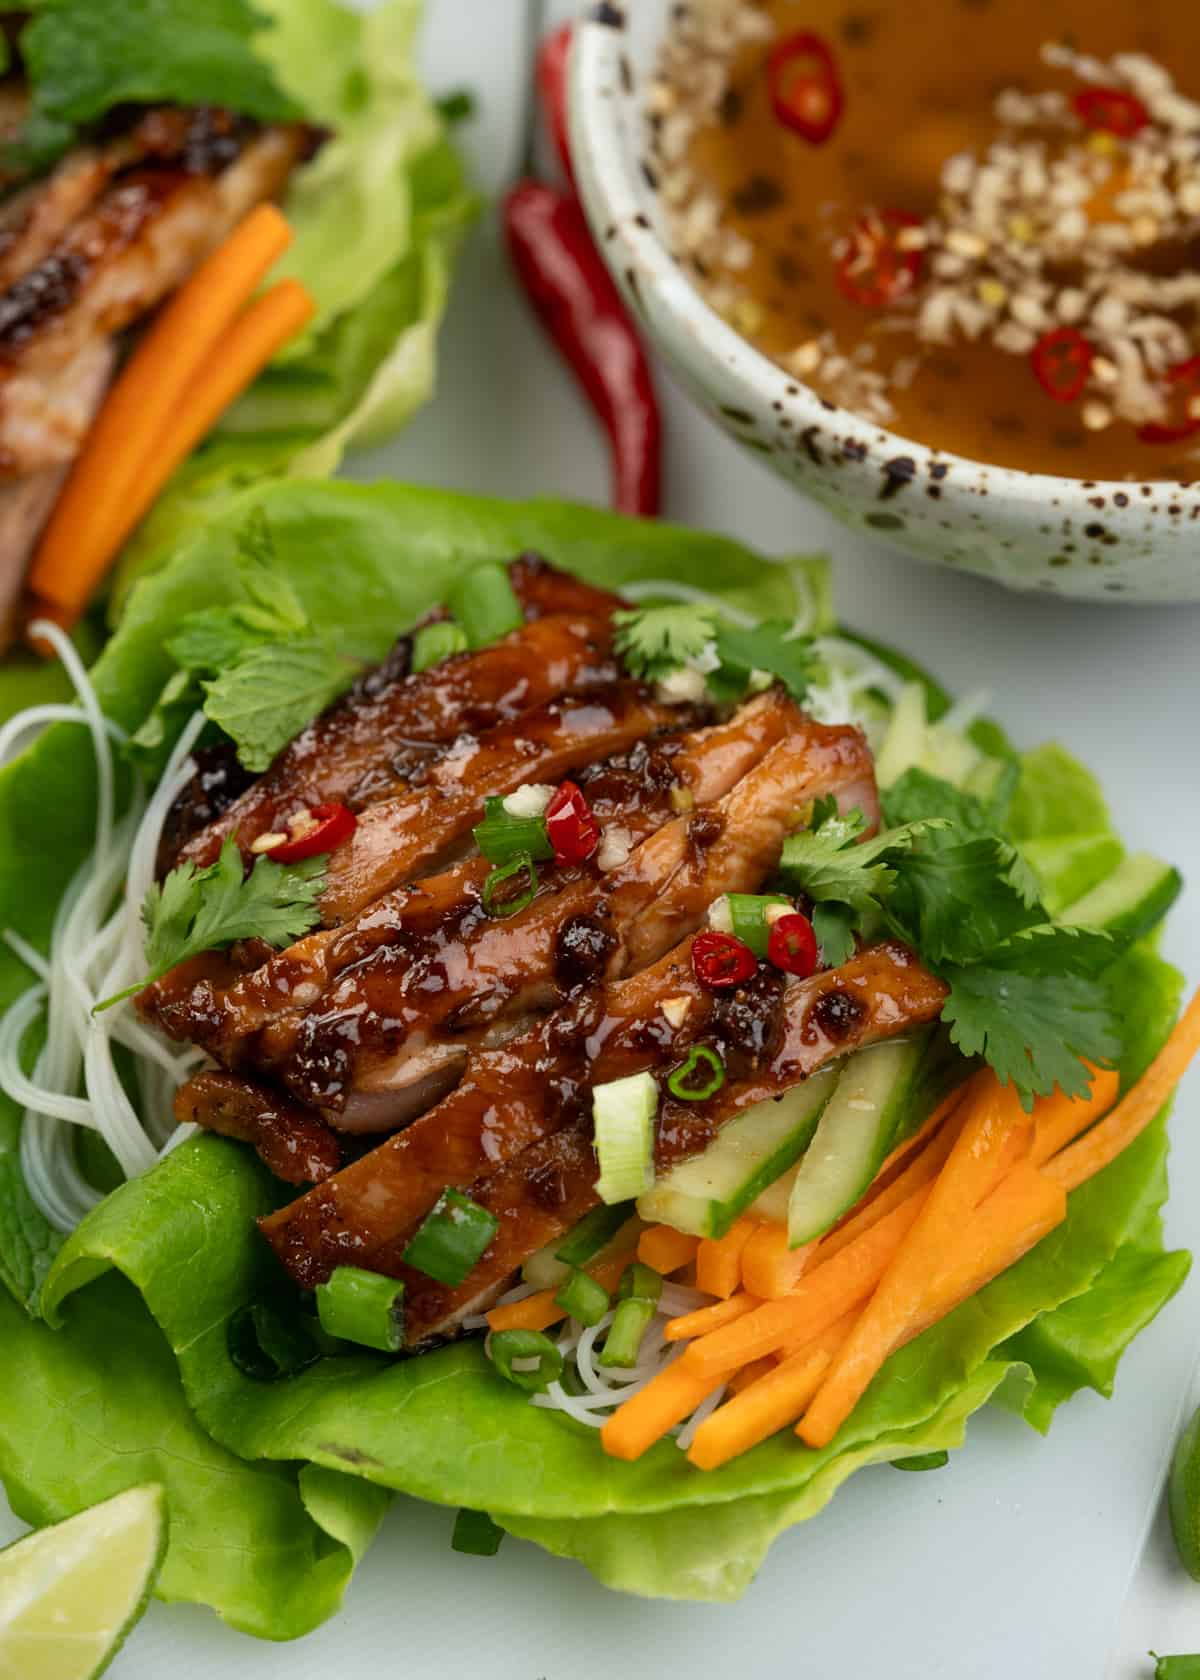 Tender lettuce leaves are topped with sweet sticky chicken, crunchy veggies, rice vermicelli, and fresh herbs and dressed with Nuoc Cham a salty, sweet, and spicy Vietnamese dipping sauce.